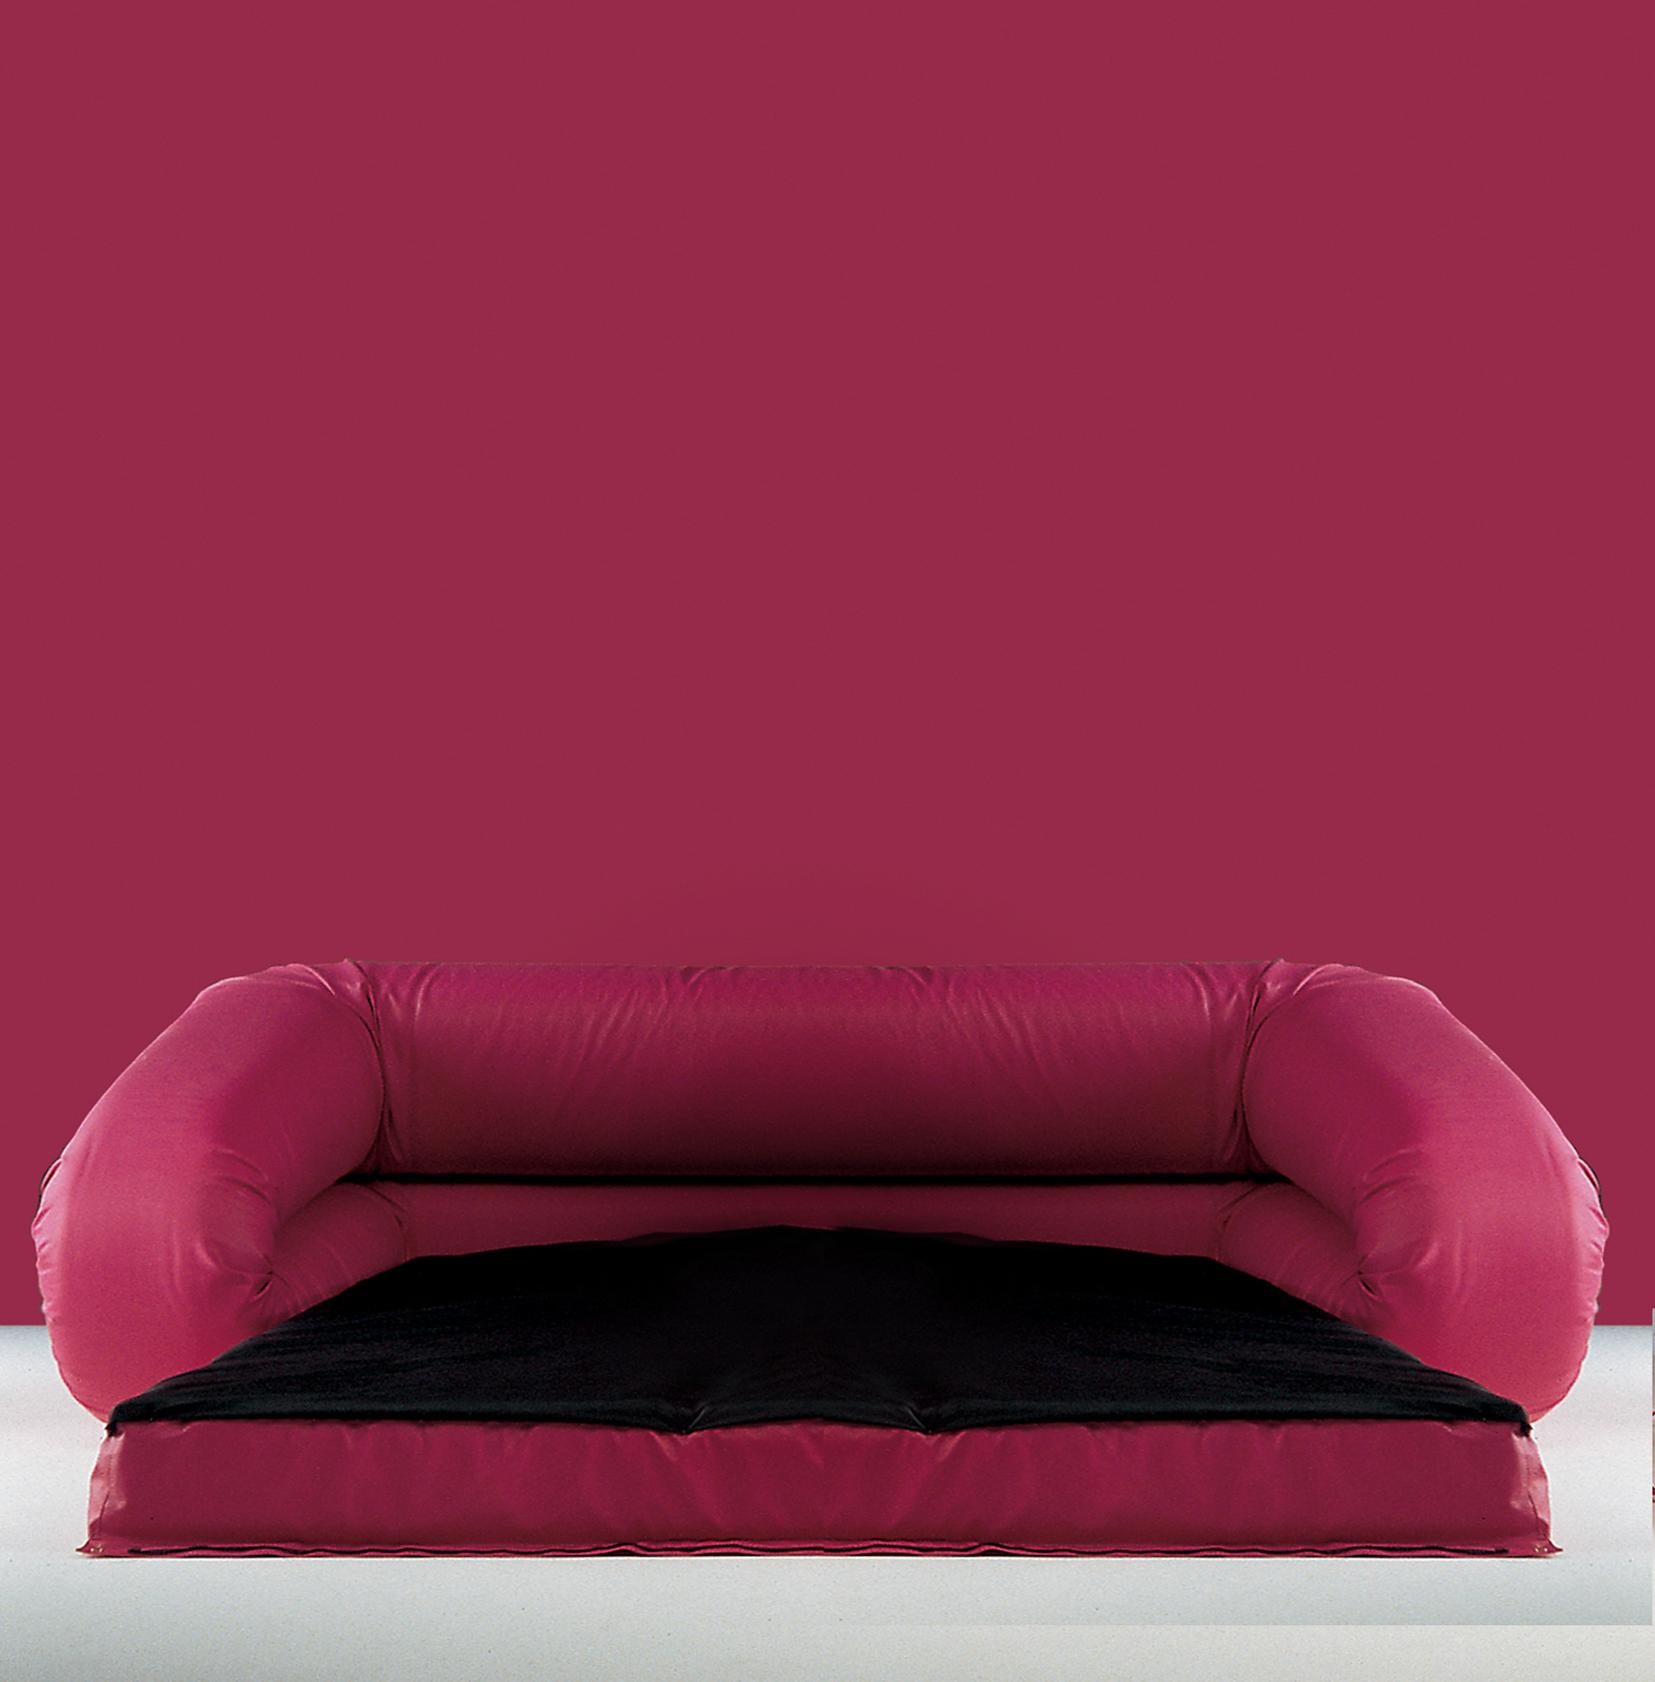 The bed-sofa, designed by Alessandro Becchi together with the Giovannetti staff ha recently celebrated its 50 years.
Its history is full of important events and participations. A piece considered a “Classic” of Italian Design, interpreting all-over